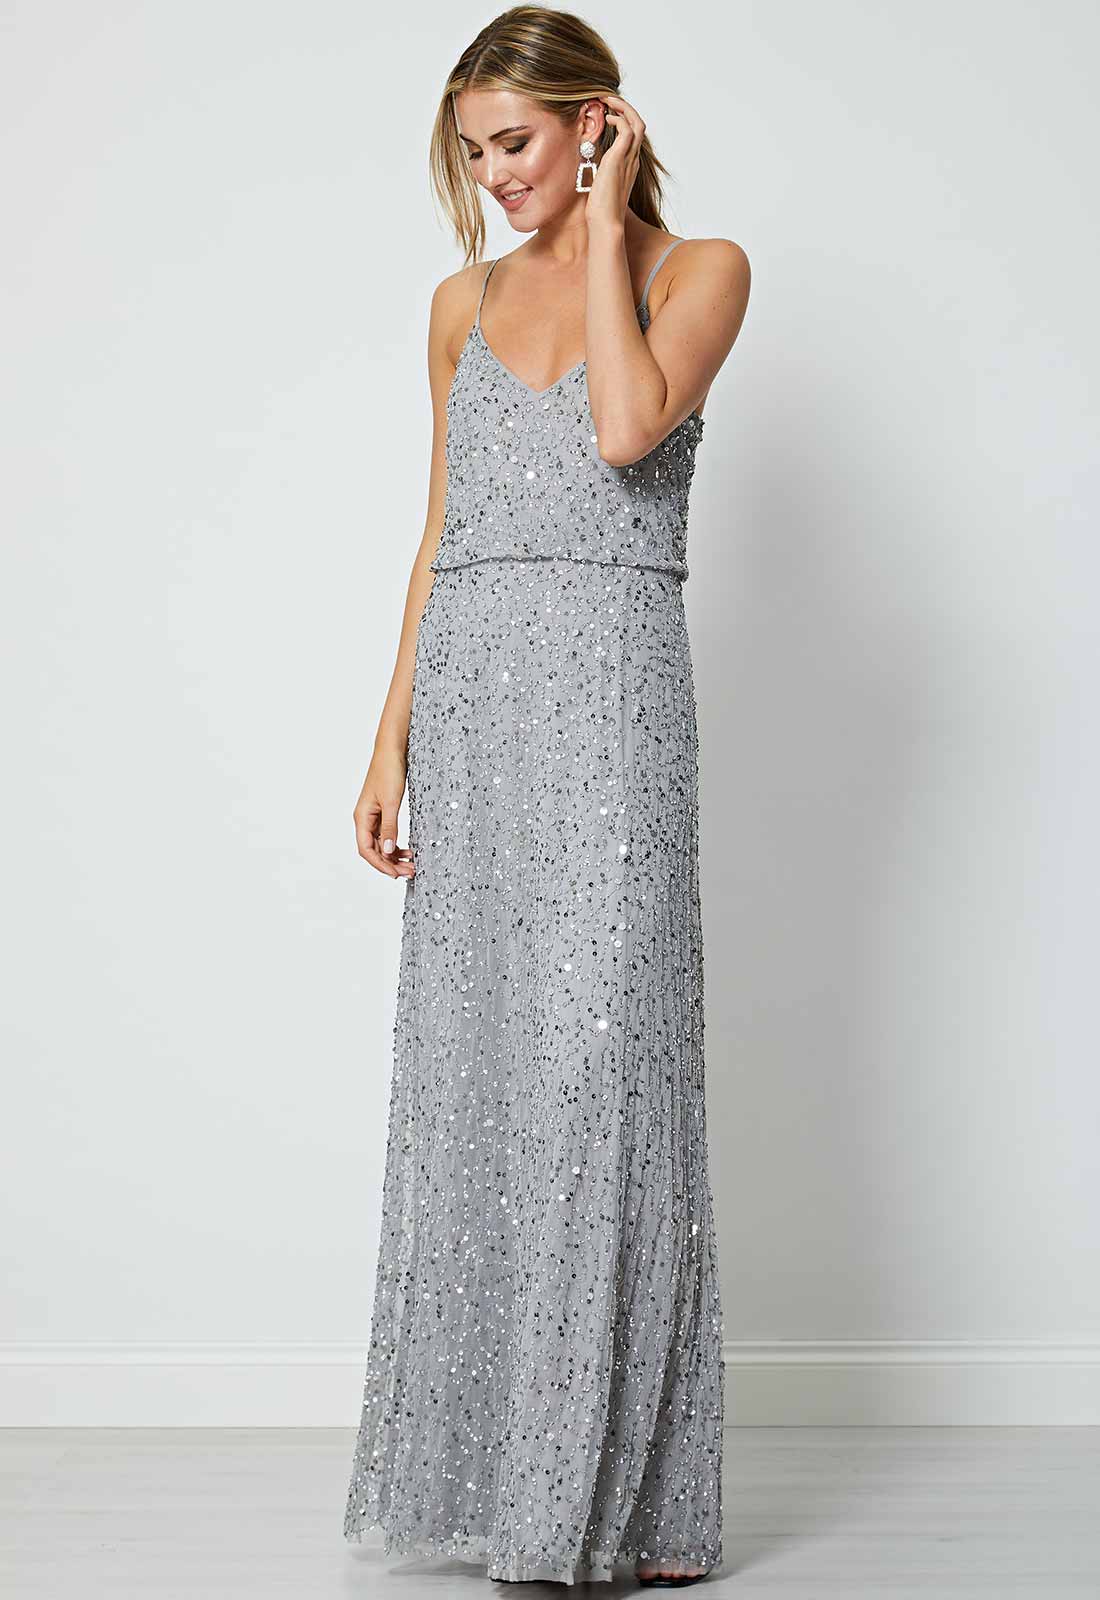 ANGELEYE Silver Lucy Embellished Maxi Dress-0